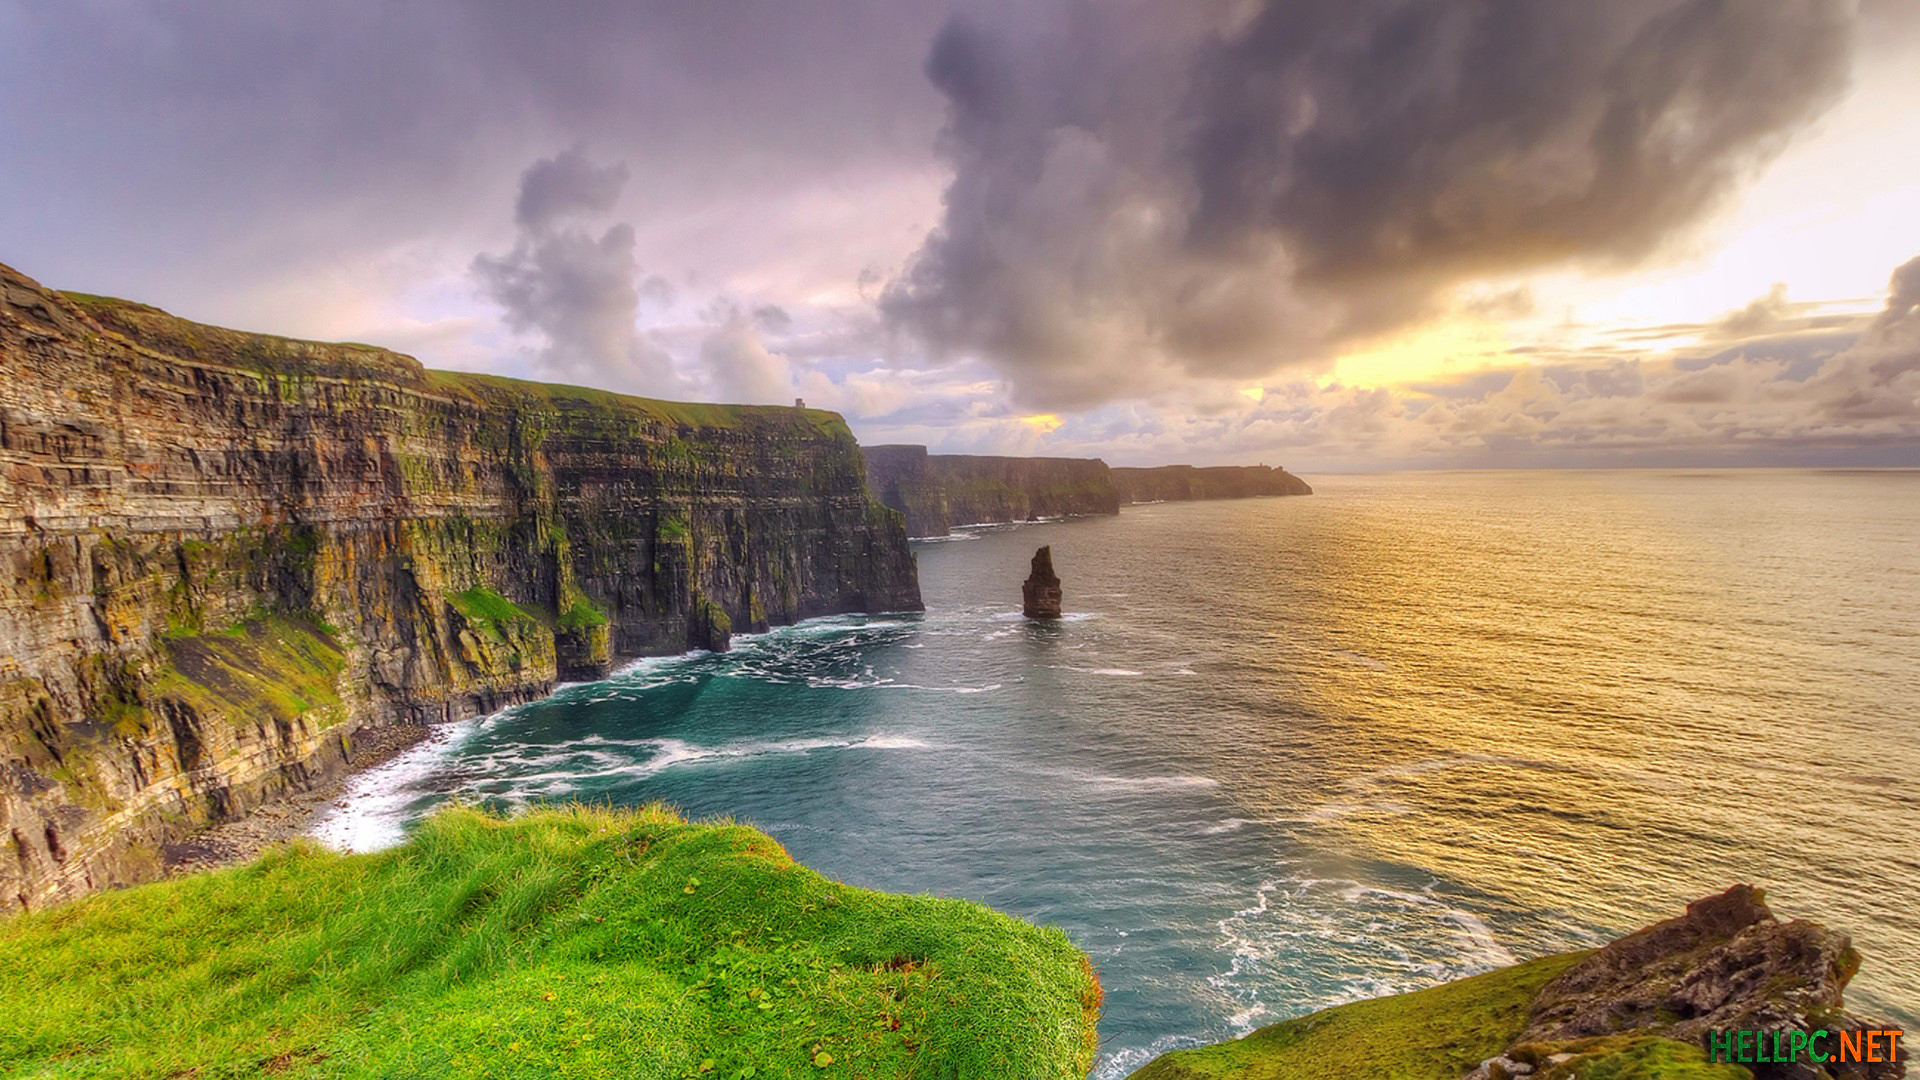 How To Enable Windows 10 Lock Screen Wallpapers - County Clare Ireland Cliffs Of Moher , HD Wallpaper & Backgrounds